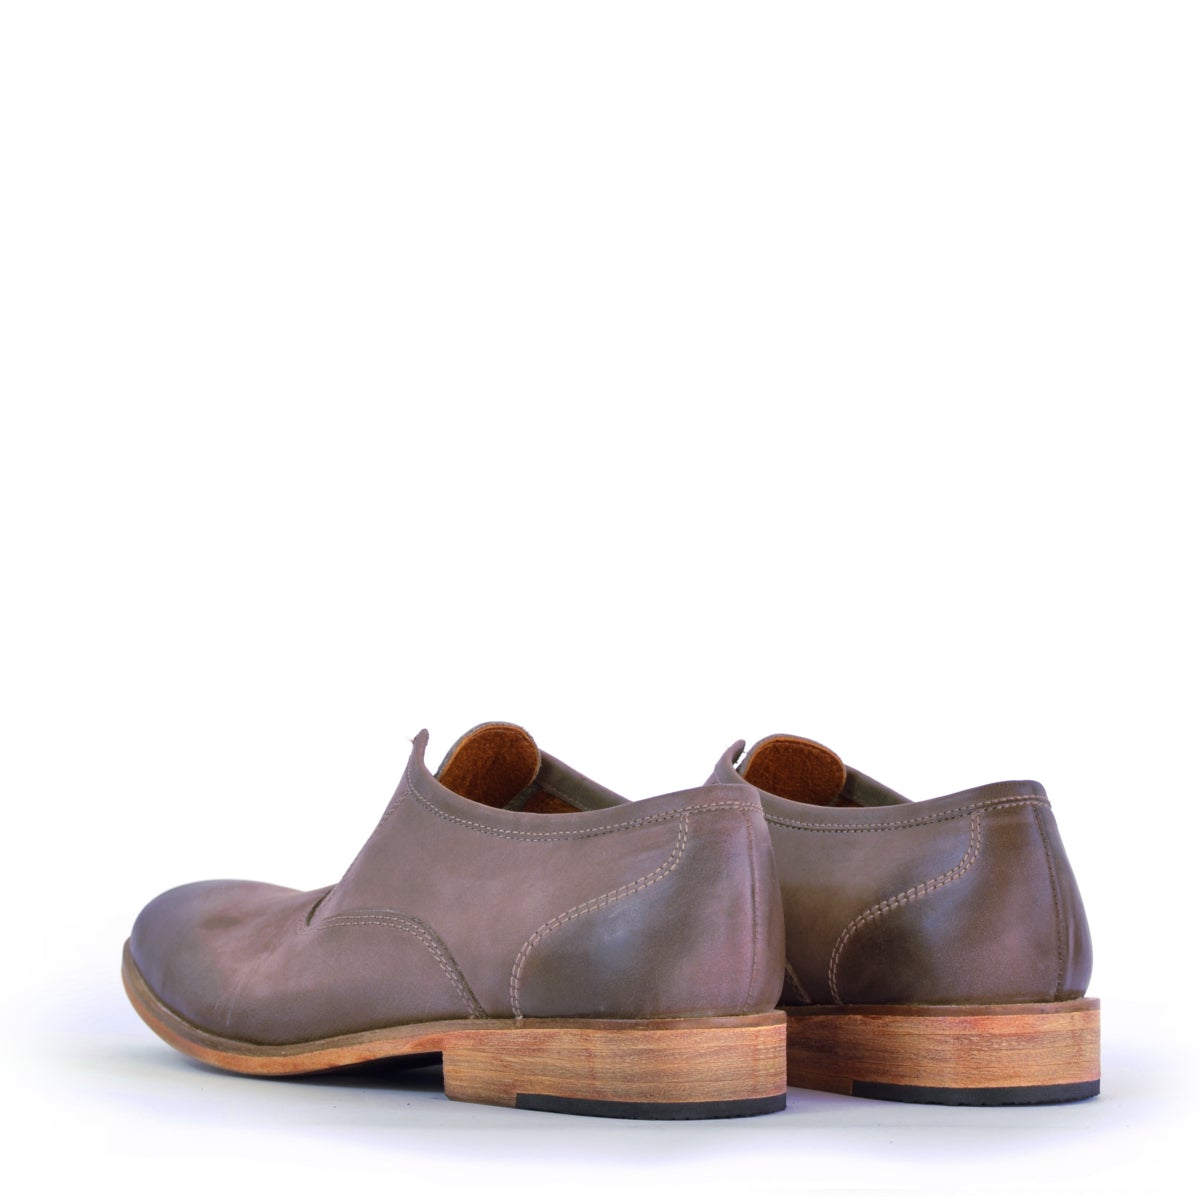 Chelo Gun - Leather Shoes